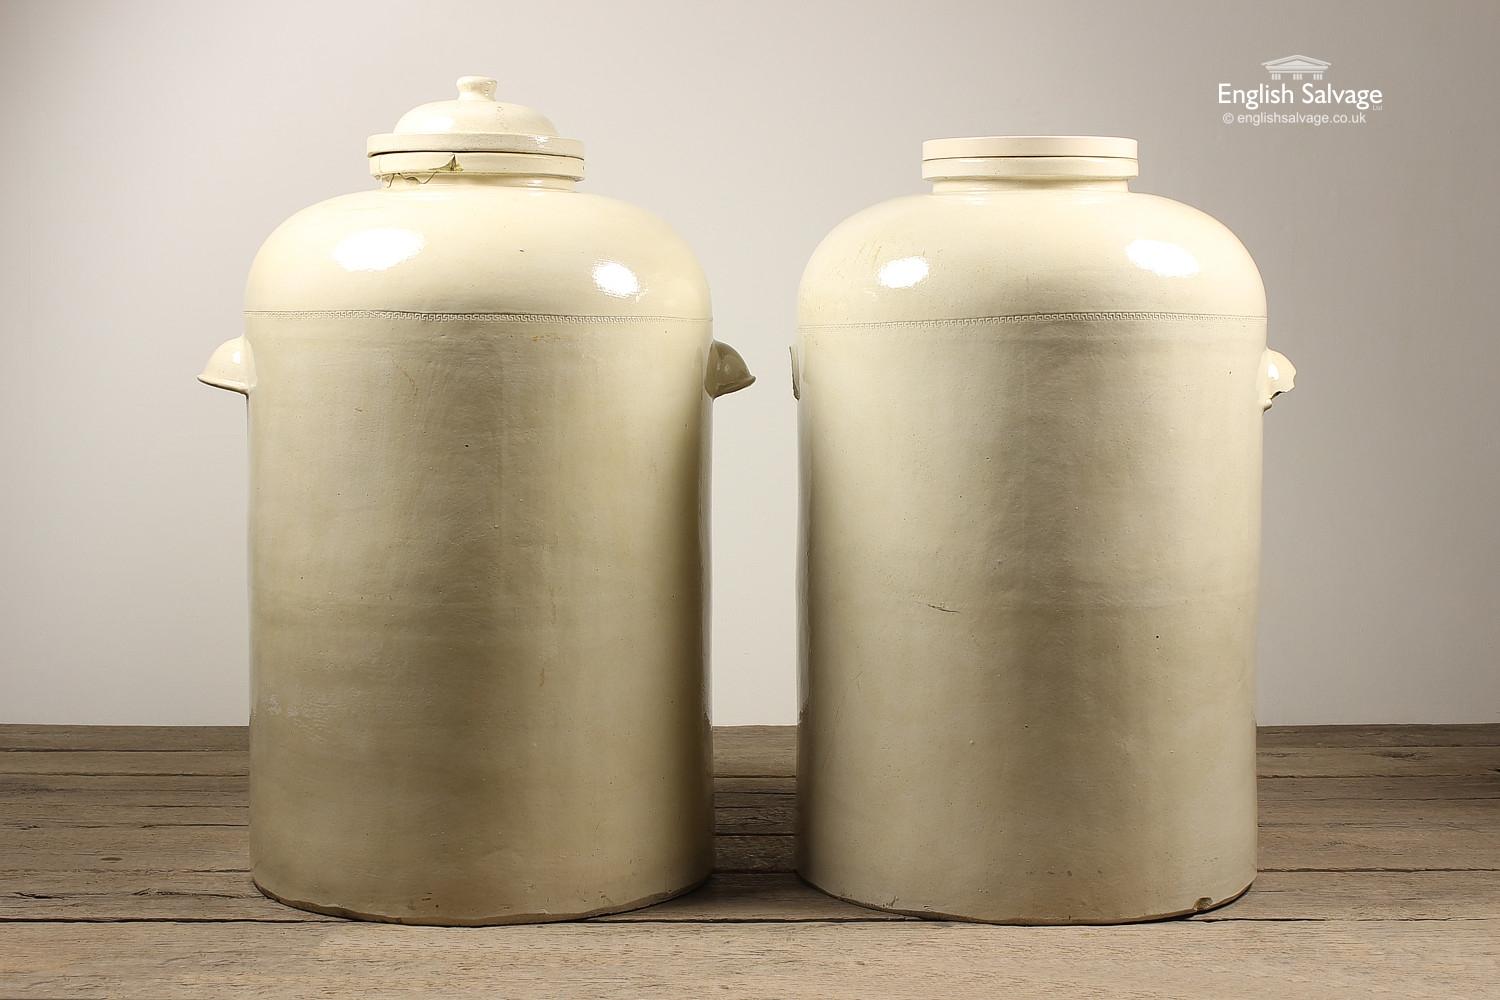 Two magnificent, vast, antique Doulton stoneware chemical storage jars with carry handles and bottom outlet. One jar has a lid (approx 110cm high) whilst the other has a bung like fitting (approx 104cm high). Both have the initials AJ embossed on